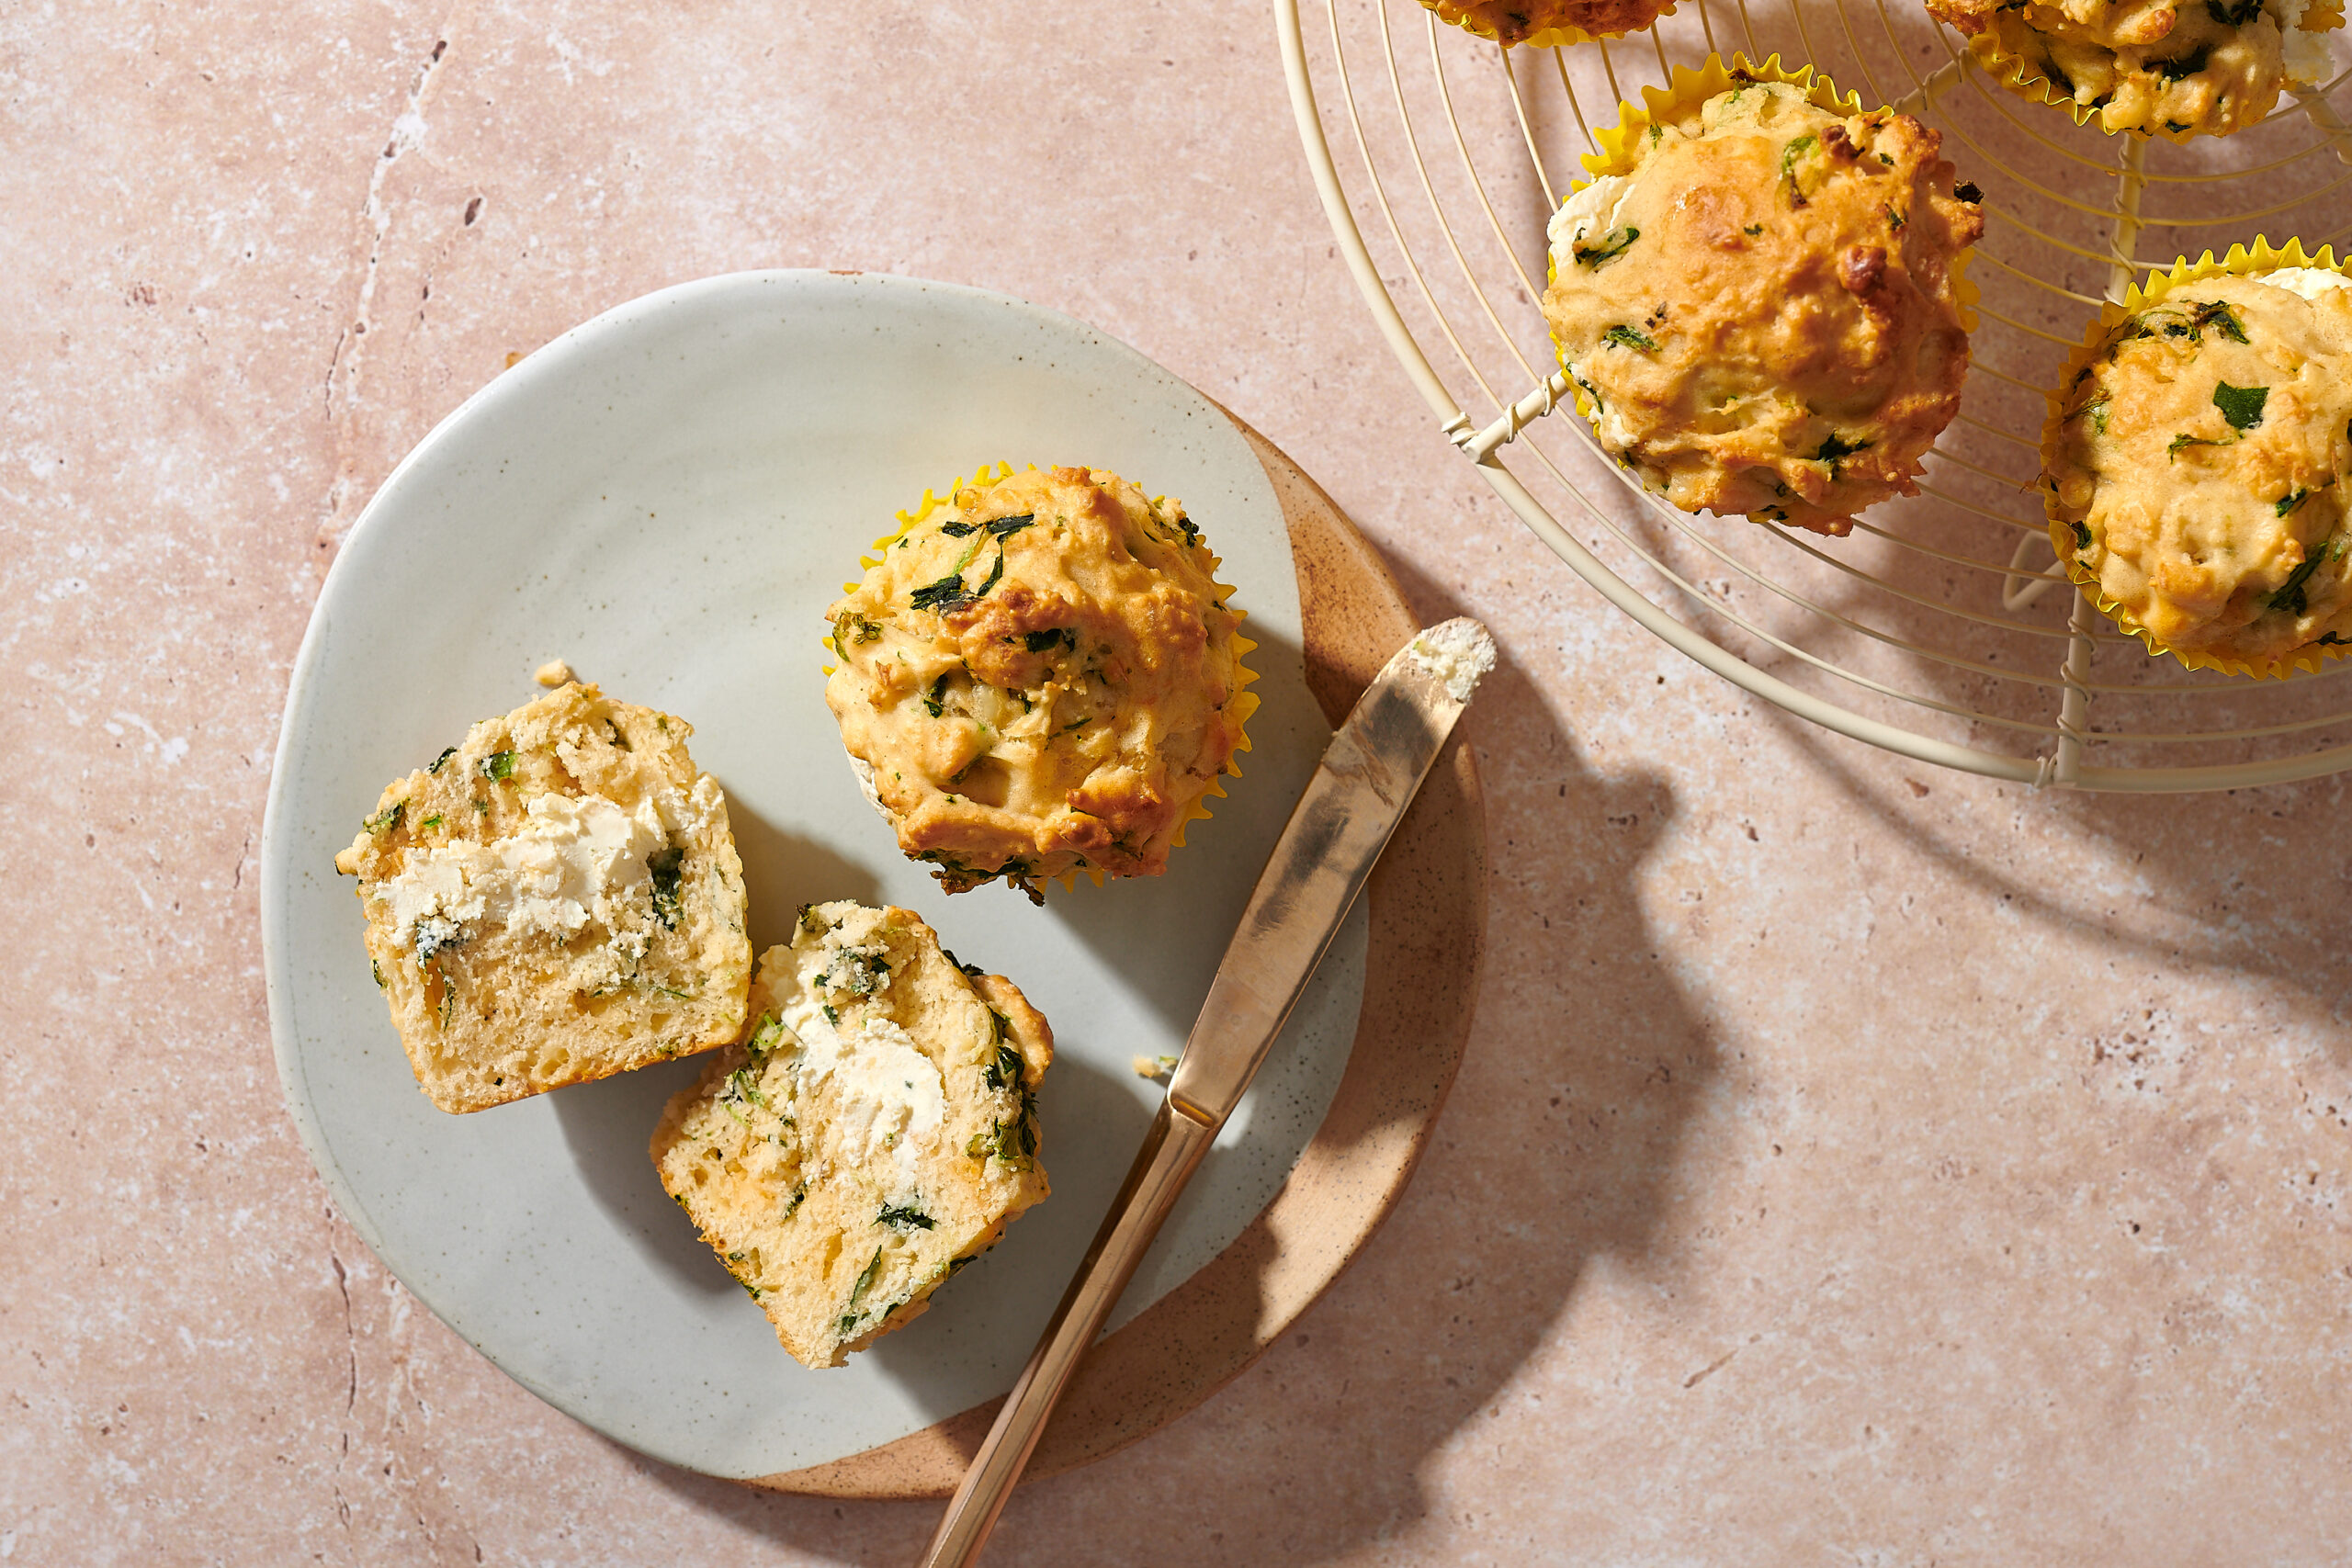 Savoury muffins with a cream cheese centre - photo of two muffins on a plate, one is cut open to reveal the centre, with some muffins on a cooling rack in the background